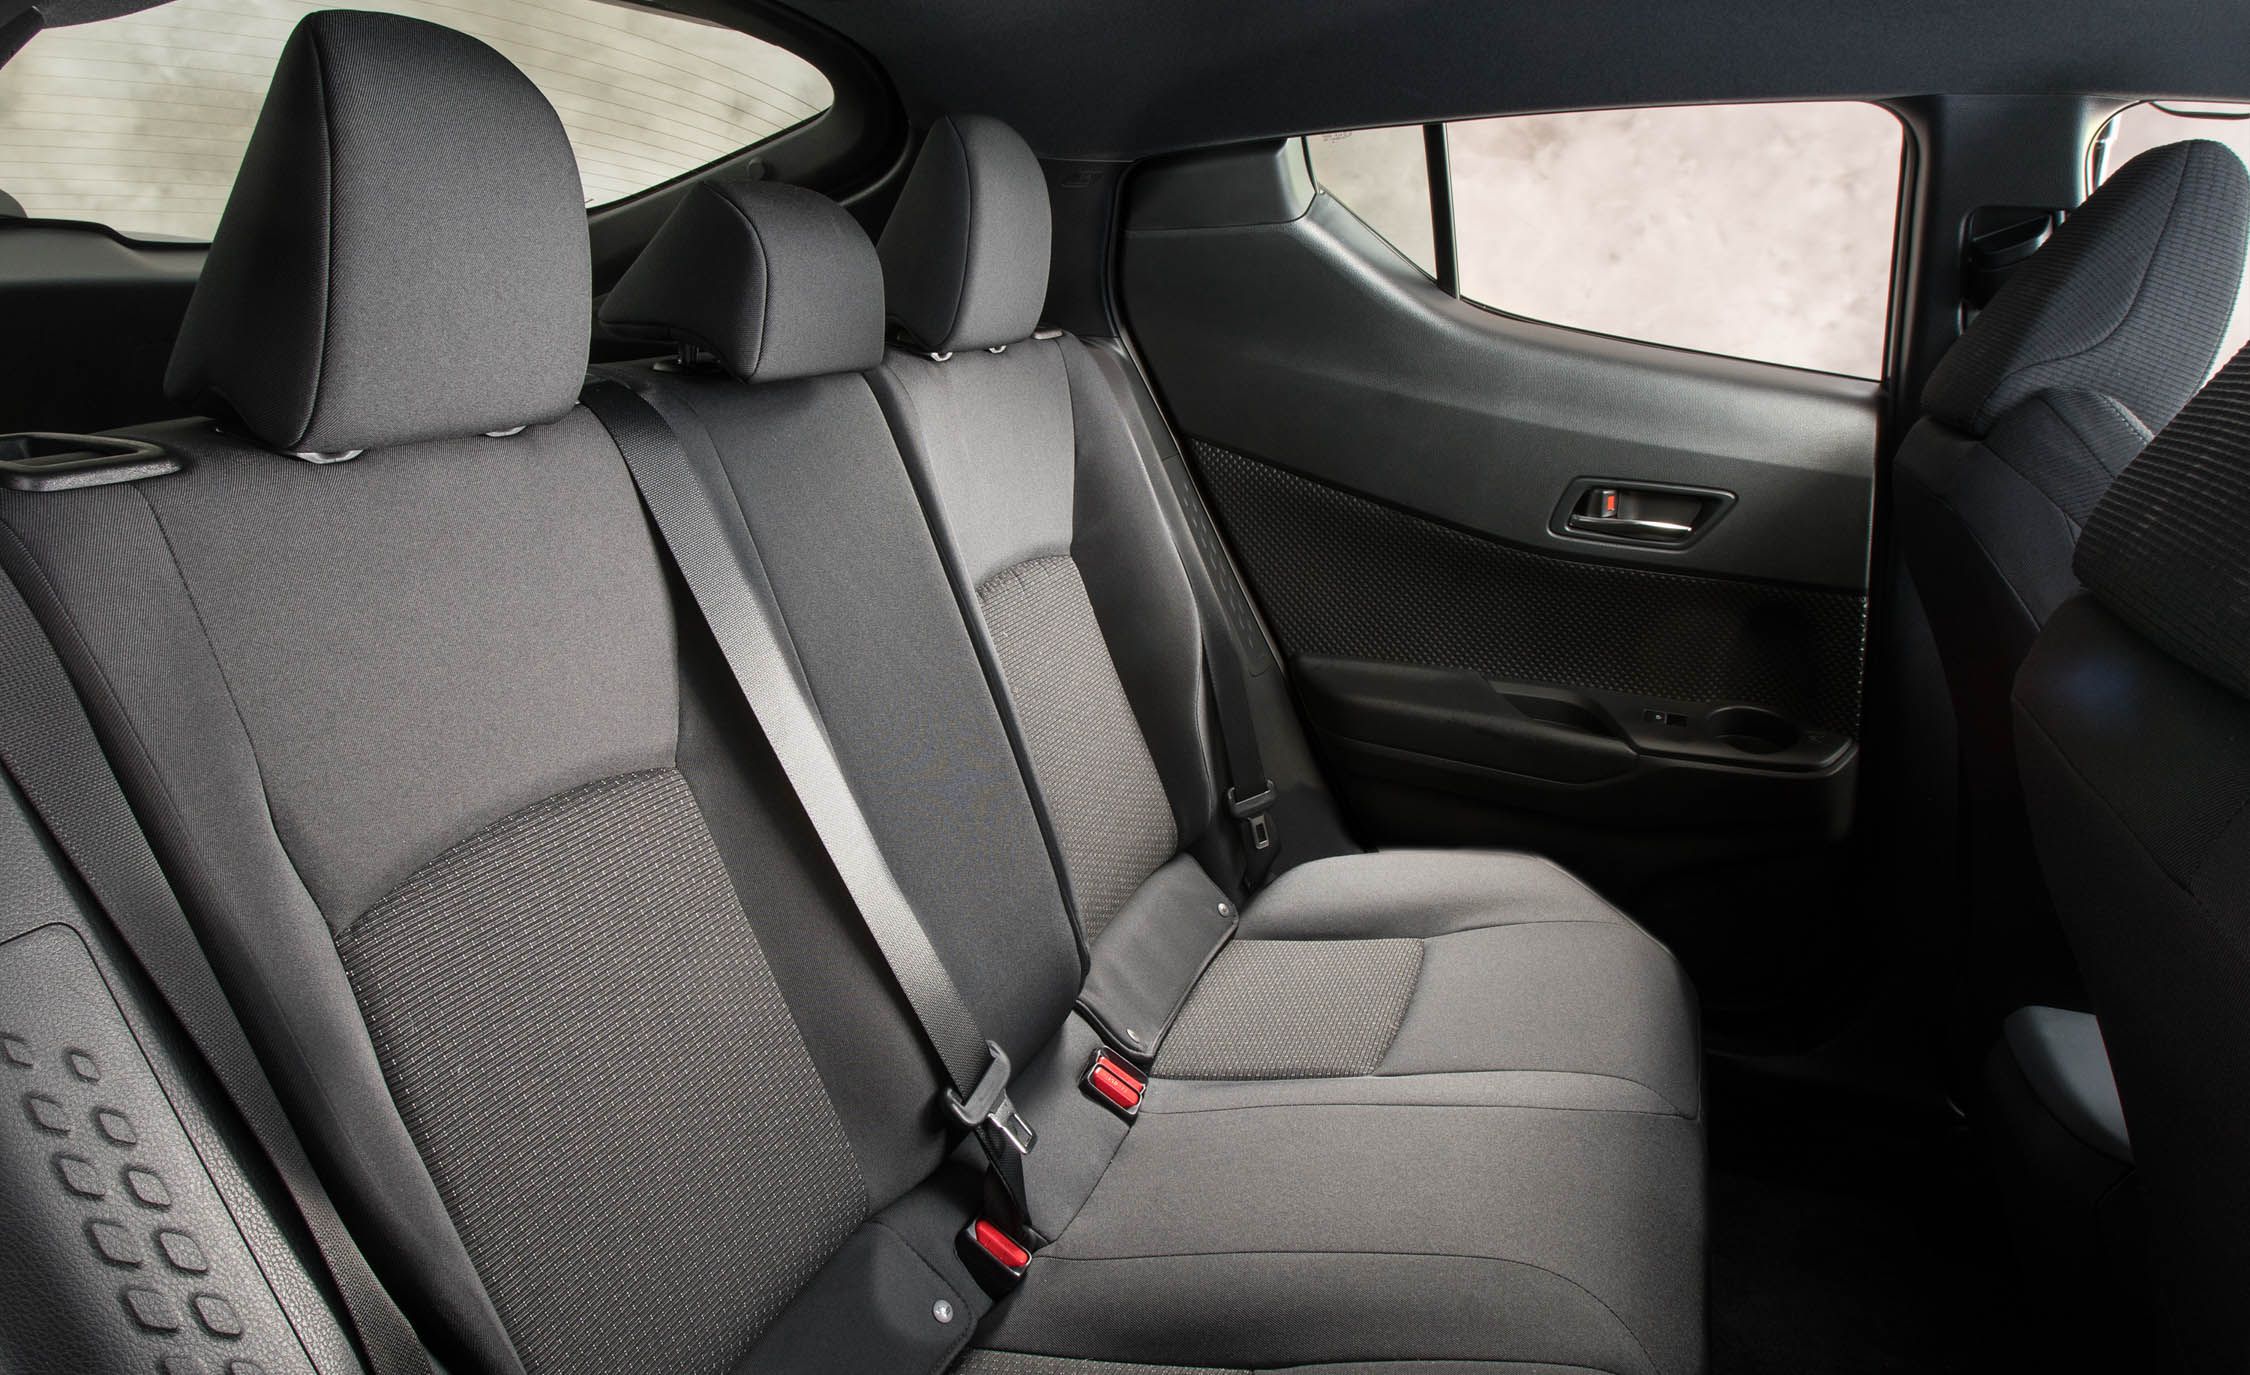 2018 Toyota C HR Interior Seats Rear (View 25 of 33)